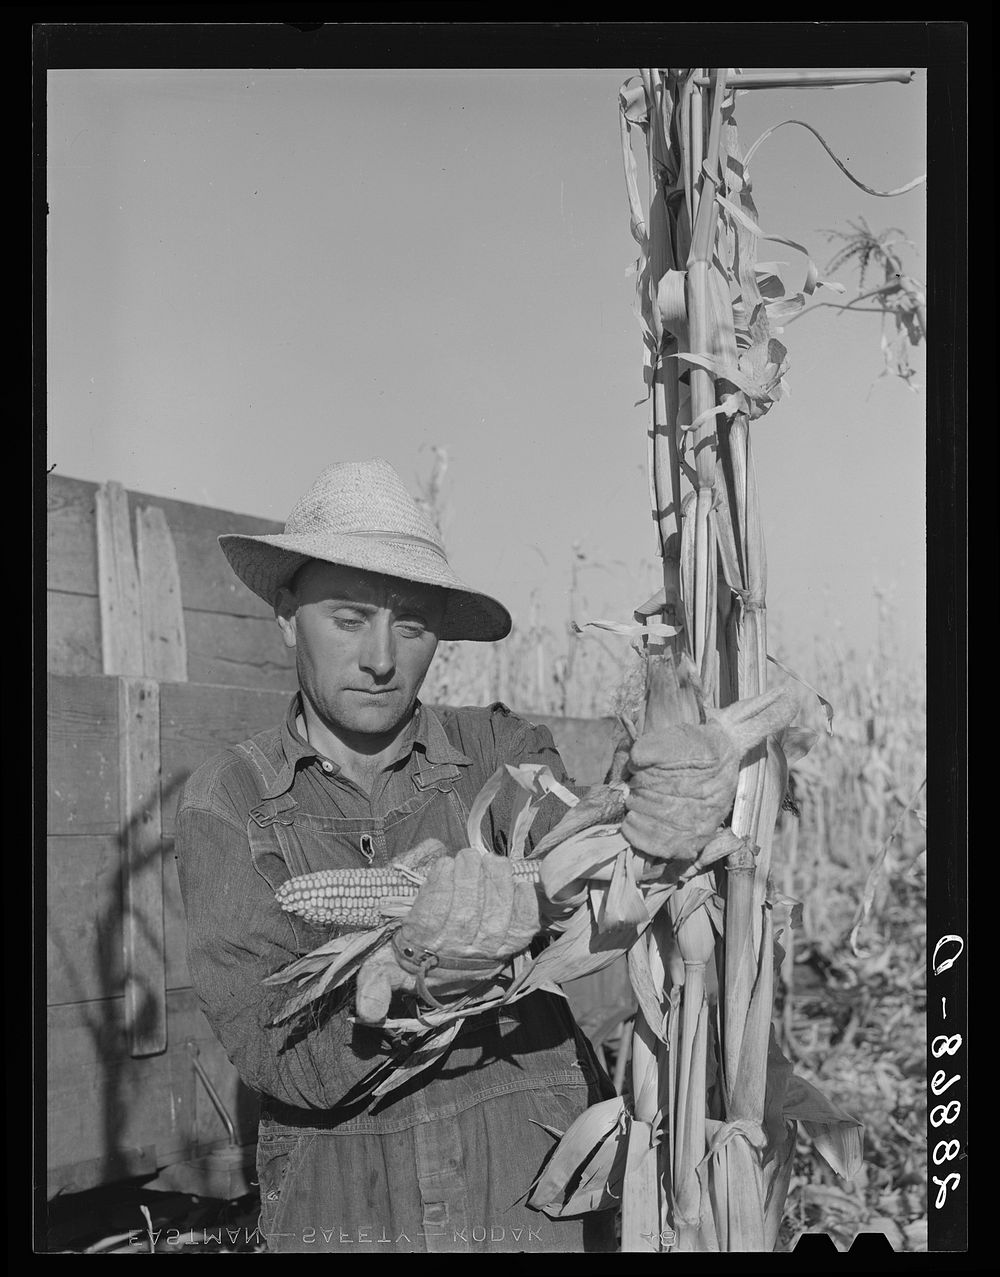 Husking corn. Grundy County, Iowa. Sourced from the Library of Congress.